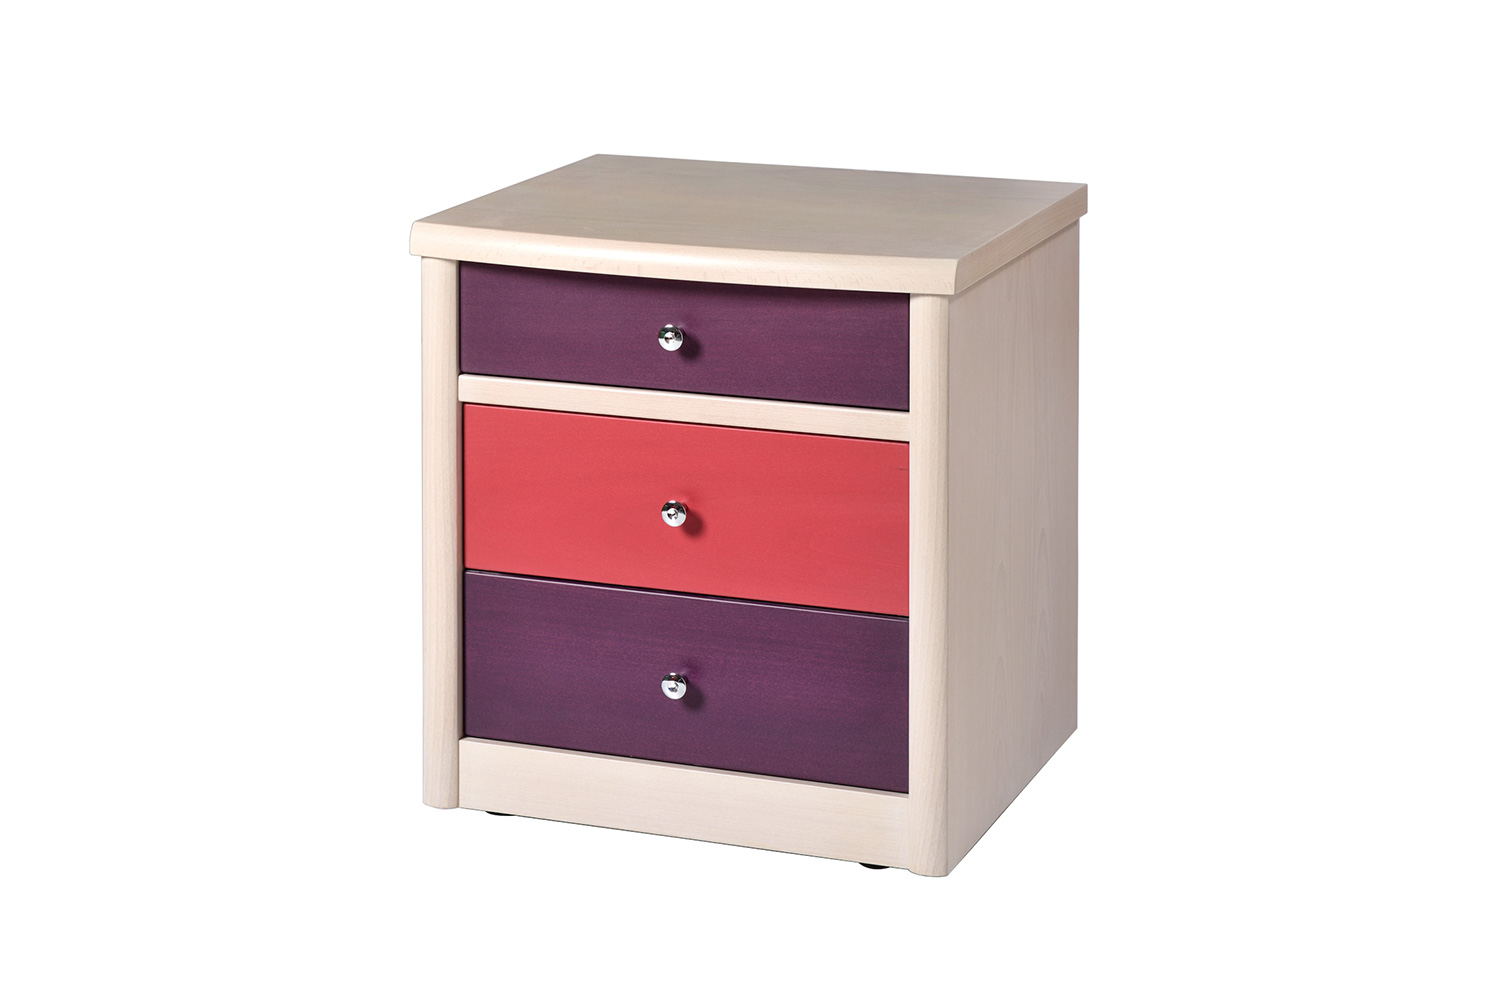  Wheeled office chest of drawers- IRIS